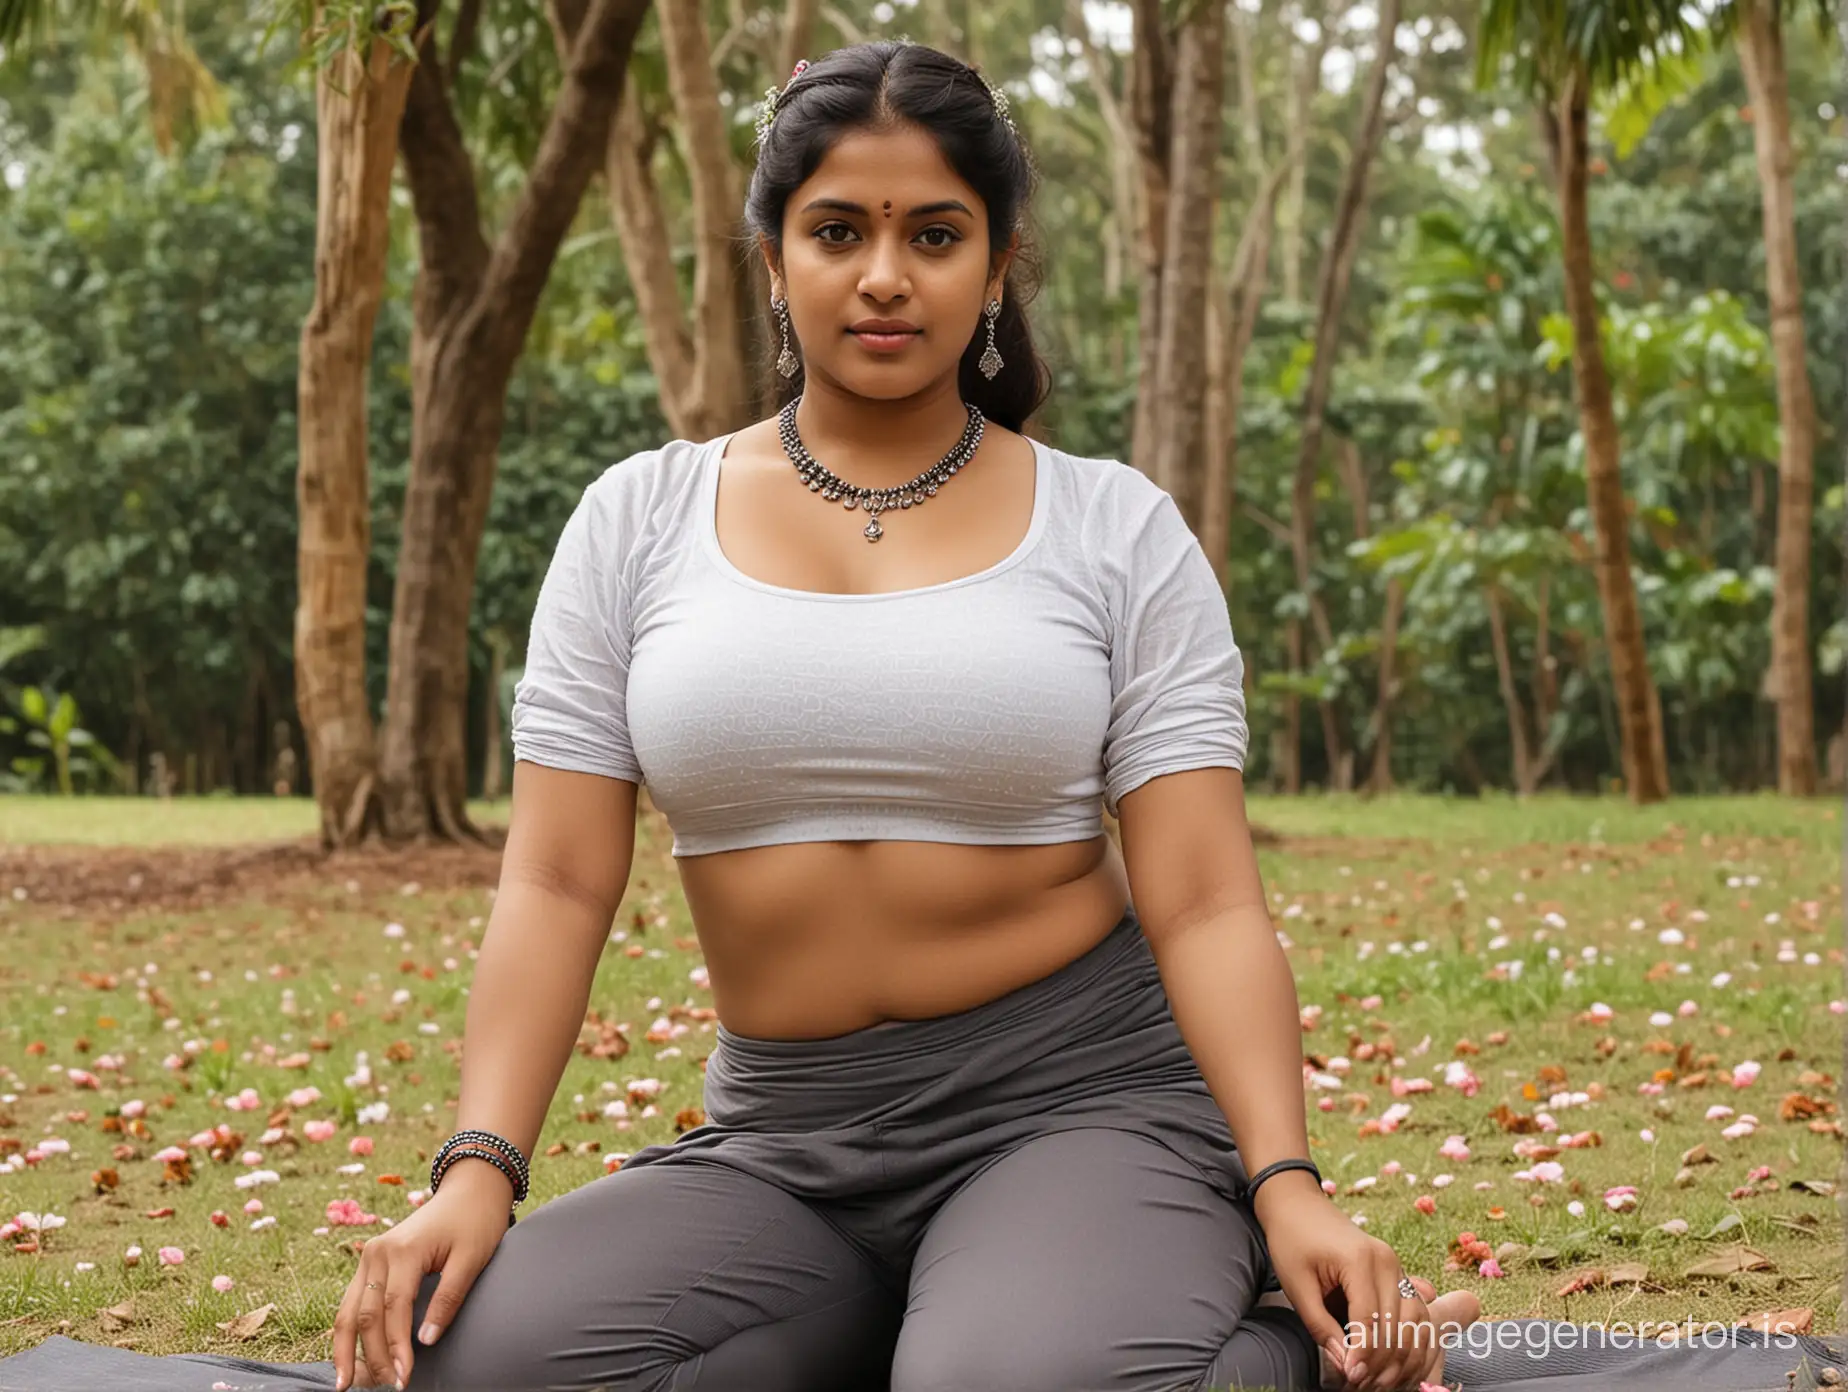 Hot malayali women. Stout. Chubby. Brownish skin. Overweight. Bulky Thick attractive fluffy Navel deep exposure. Yoga instructor. With yoga mat. In a big park. Heavy hanging huge breasts supported by yoga bra. Low waist transparent plaited petty coat. Intimate. Passionate. Sensual. Romantic. Sluttery poses all extrovertish. Longing for boyfriend. Self pleasure. Imagination. seductive. Moody. Bindi. Anklet. Flowers. Bangle.